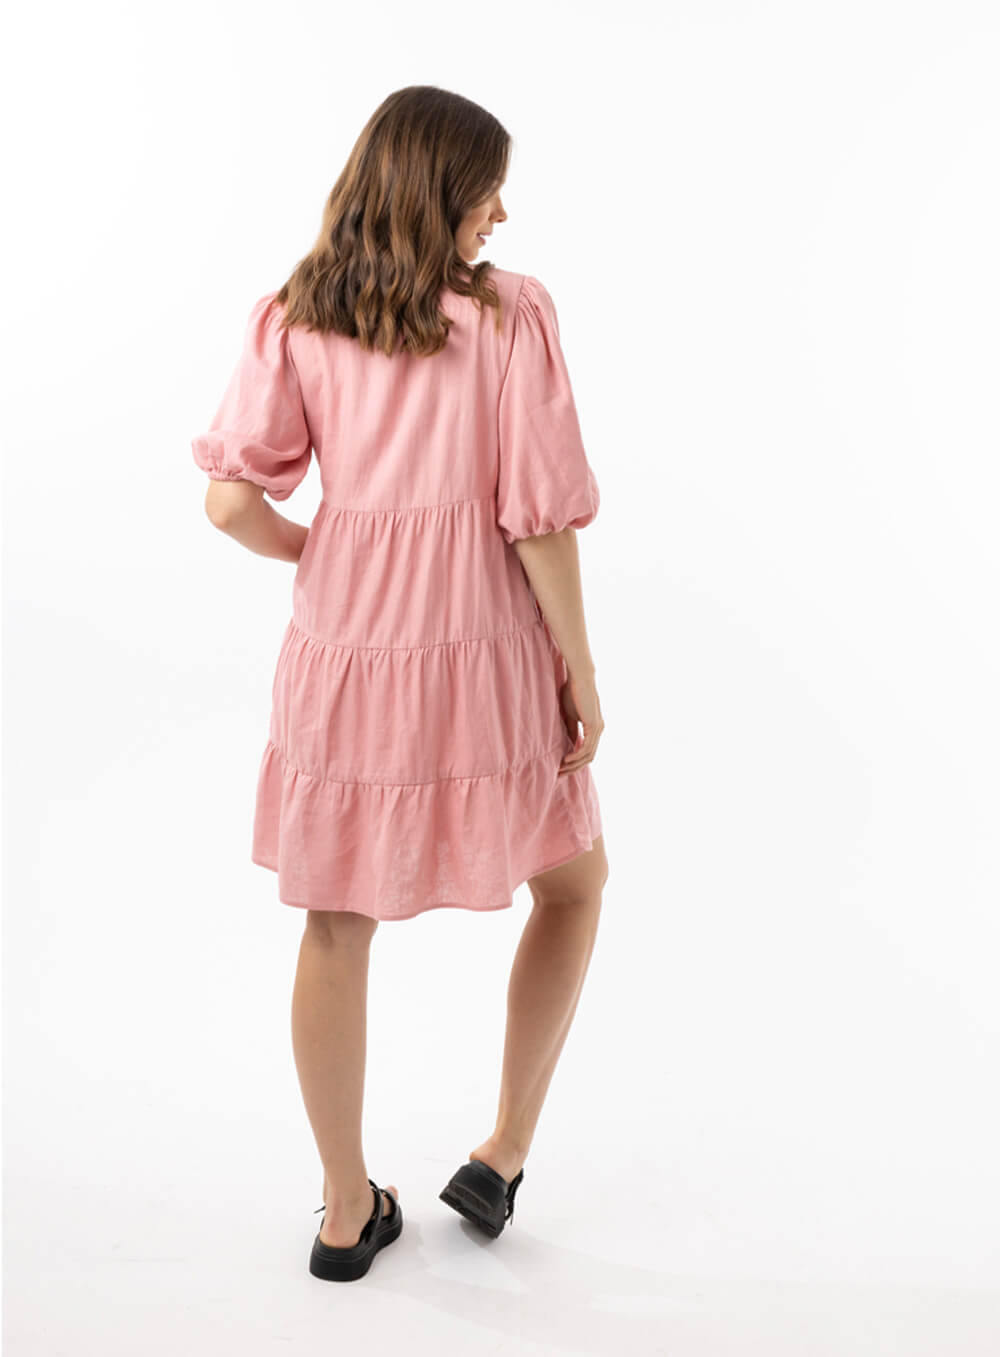 The Eleanor mini dress in blush pink features a flowing layered a line shape with draping linen/viscose fabric, puff 3/4 sleeves with elastic cuff which can be pushed up to the elbow, a dropped v shape neckline with a square finish.